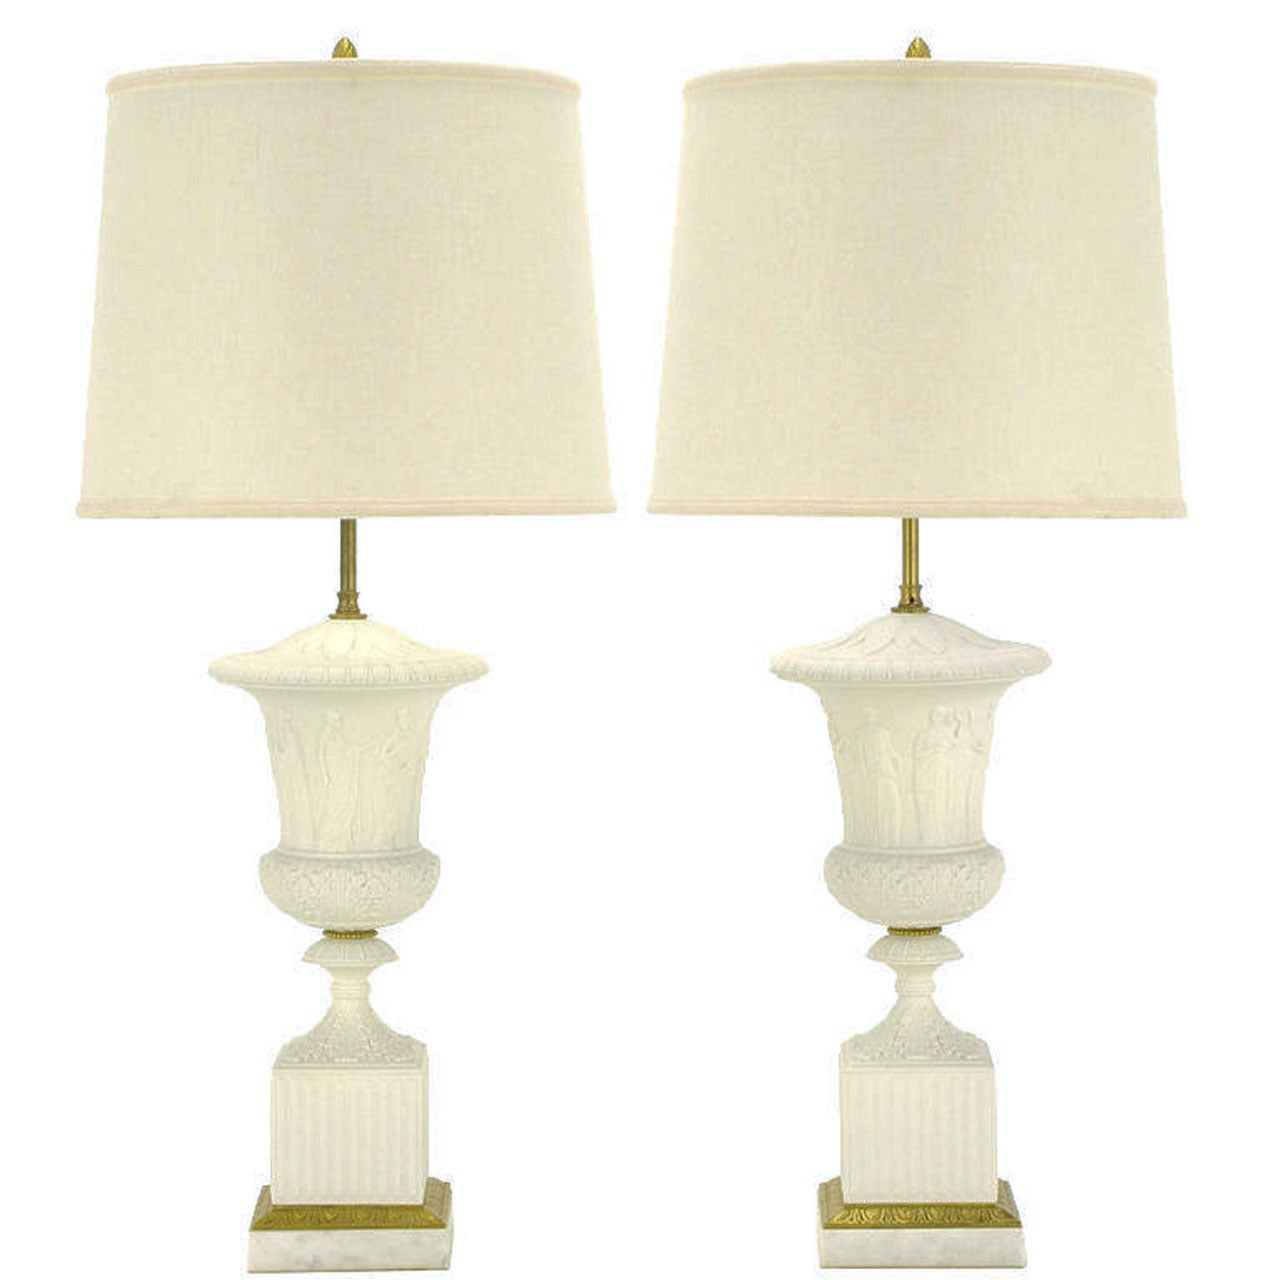 Pair Neoclassical White Bisque Porcelain Urn Form Table Lamps